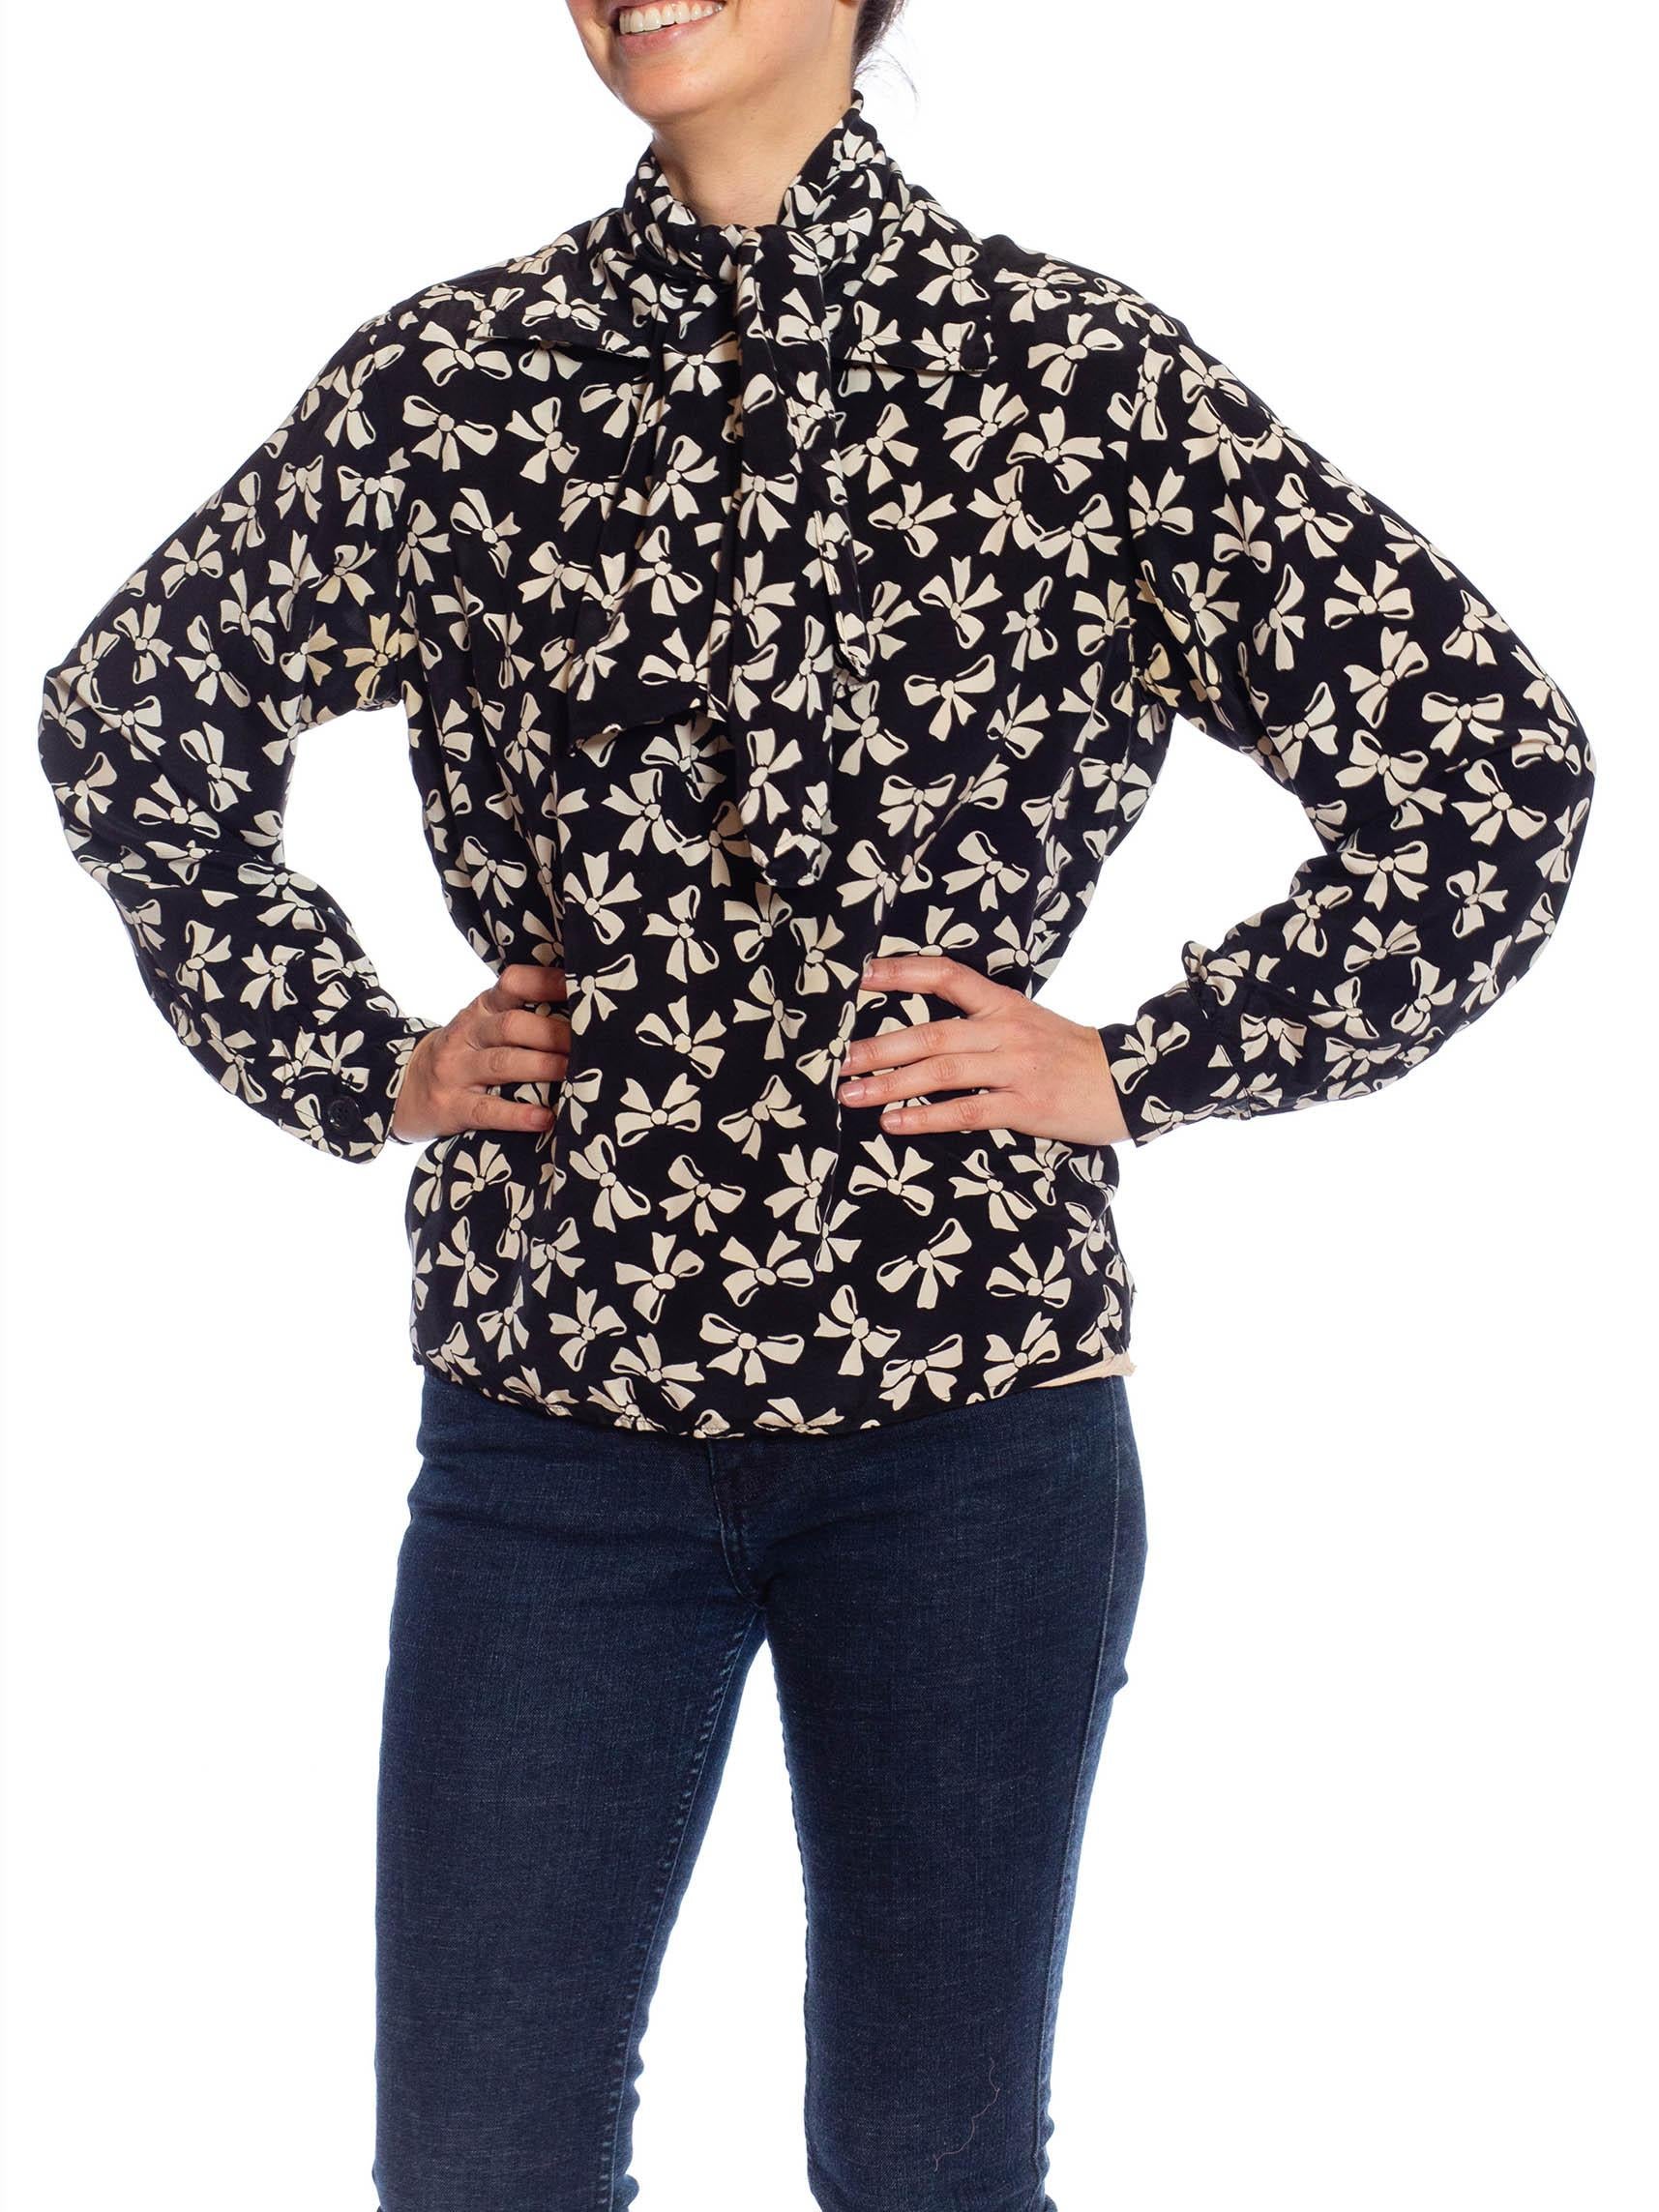 1970S YVES SAINT LAURENT Black & White Famous Bow Print Long Sleeve Blouse In Excellent Condition For Sale In New York, NY